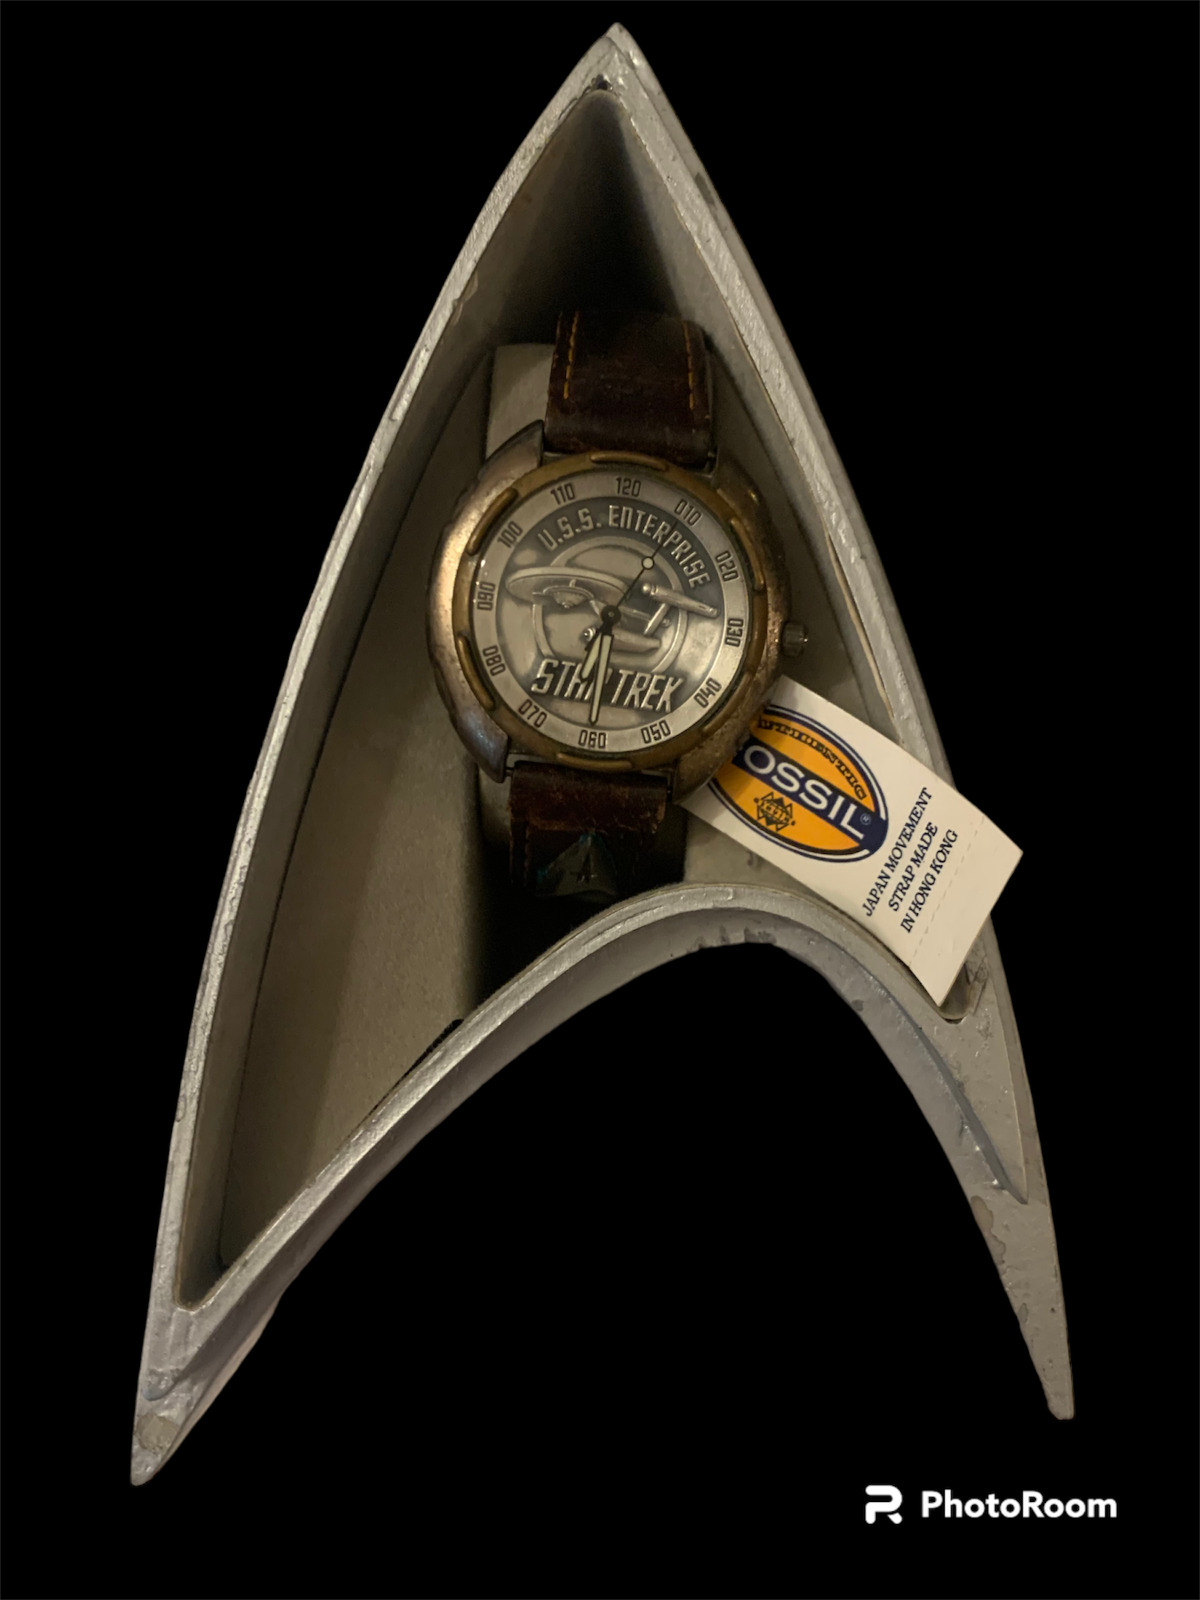 Fossil 1995 Star Trek Limited Edition Watch 9541/15000 In Boxes w/Papers+Extras